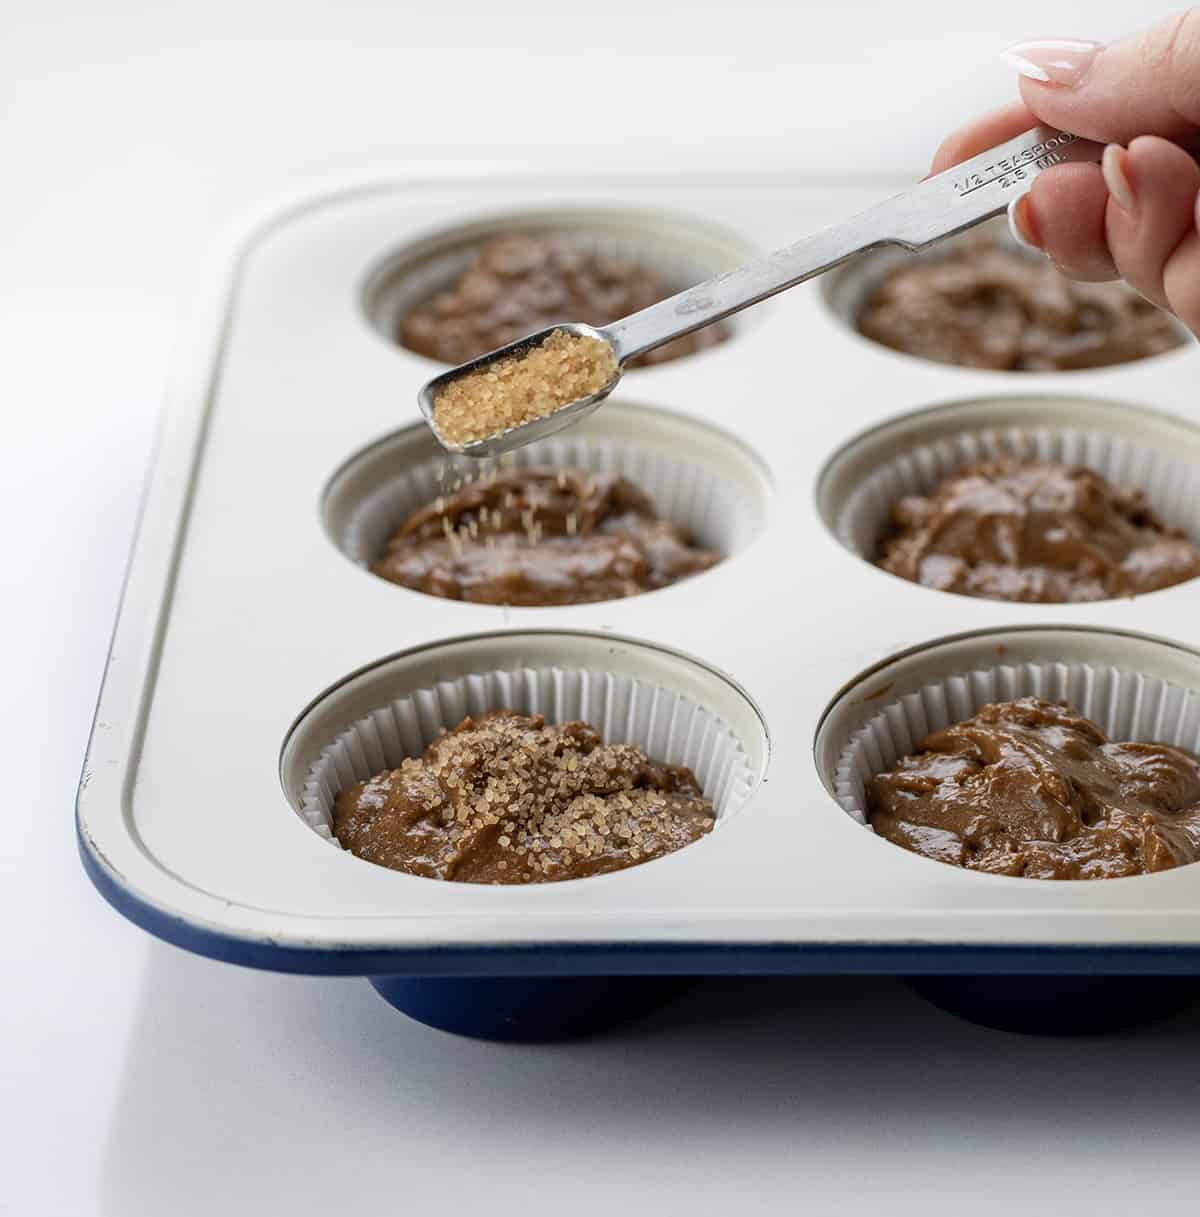 Raw Gingerbread Muffins batter in a muffin pan and adding turbinado sugar on top.